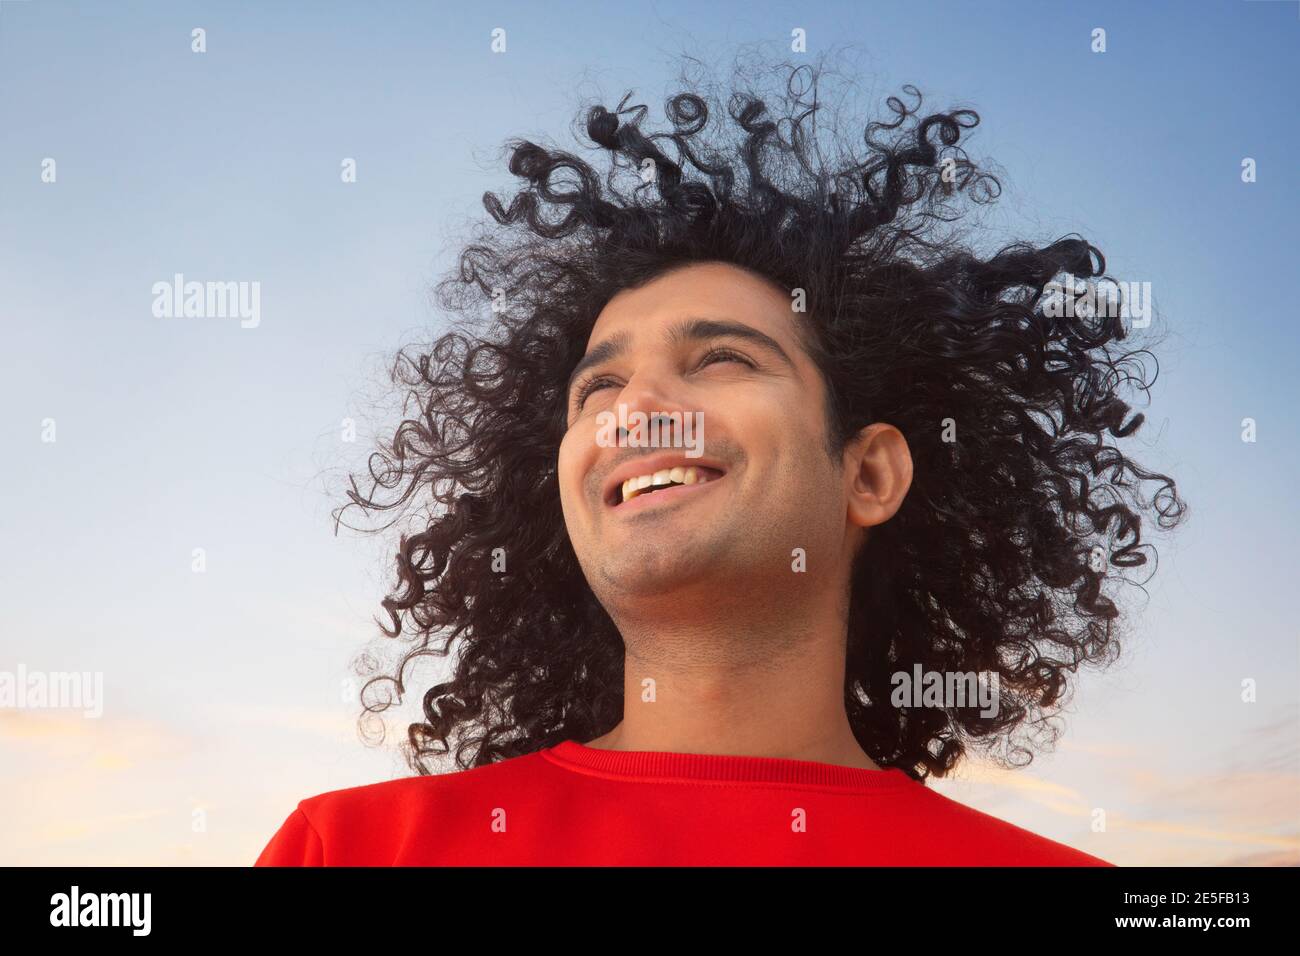 A HAPPY YOUNG MAN WITH CURLY HAIR LOOKING AWAY AND SMILING Stock Photo